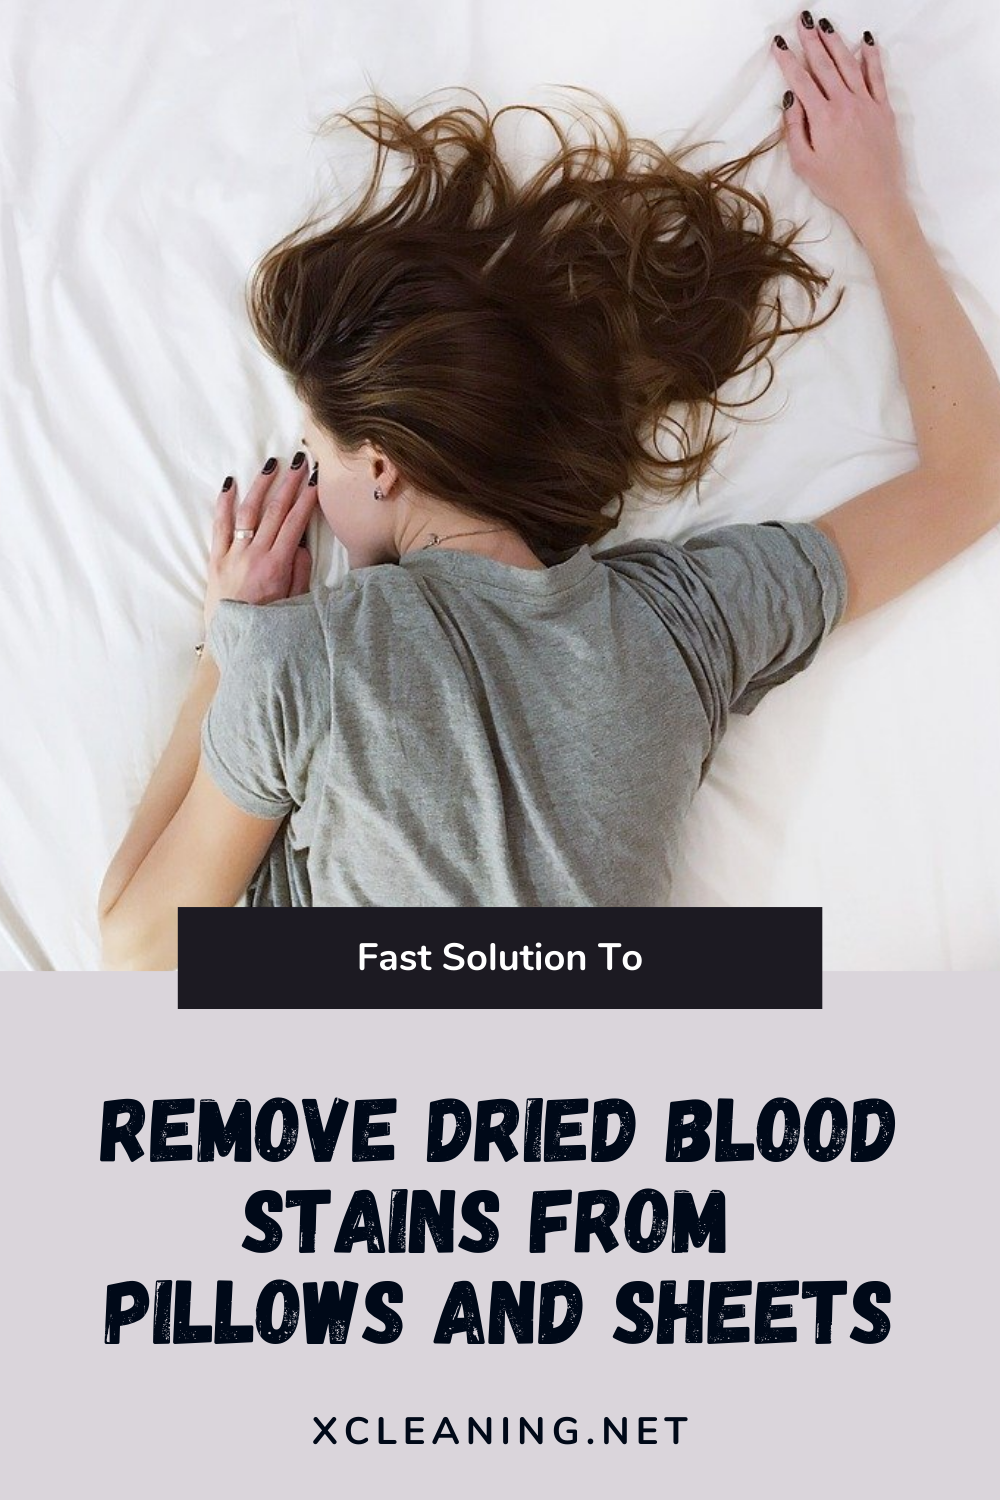 Fast-Solution-To-Remove-Dried-Blood-Stains-From-Pillows-...